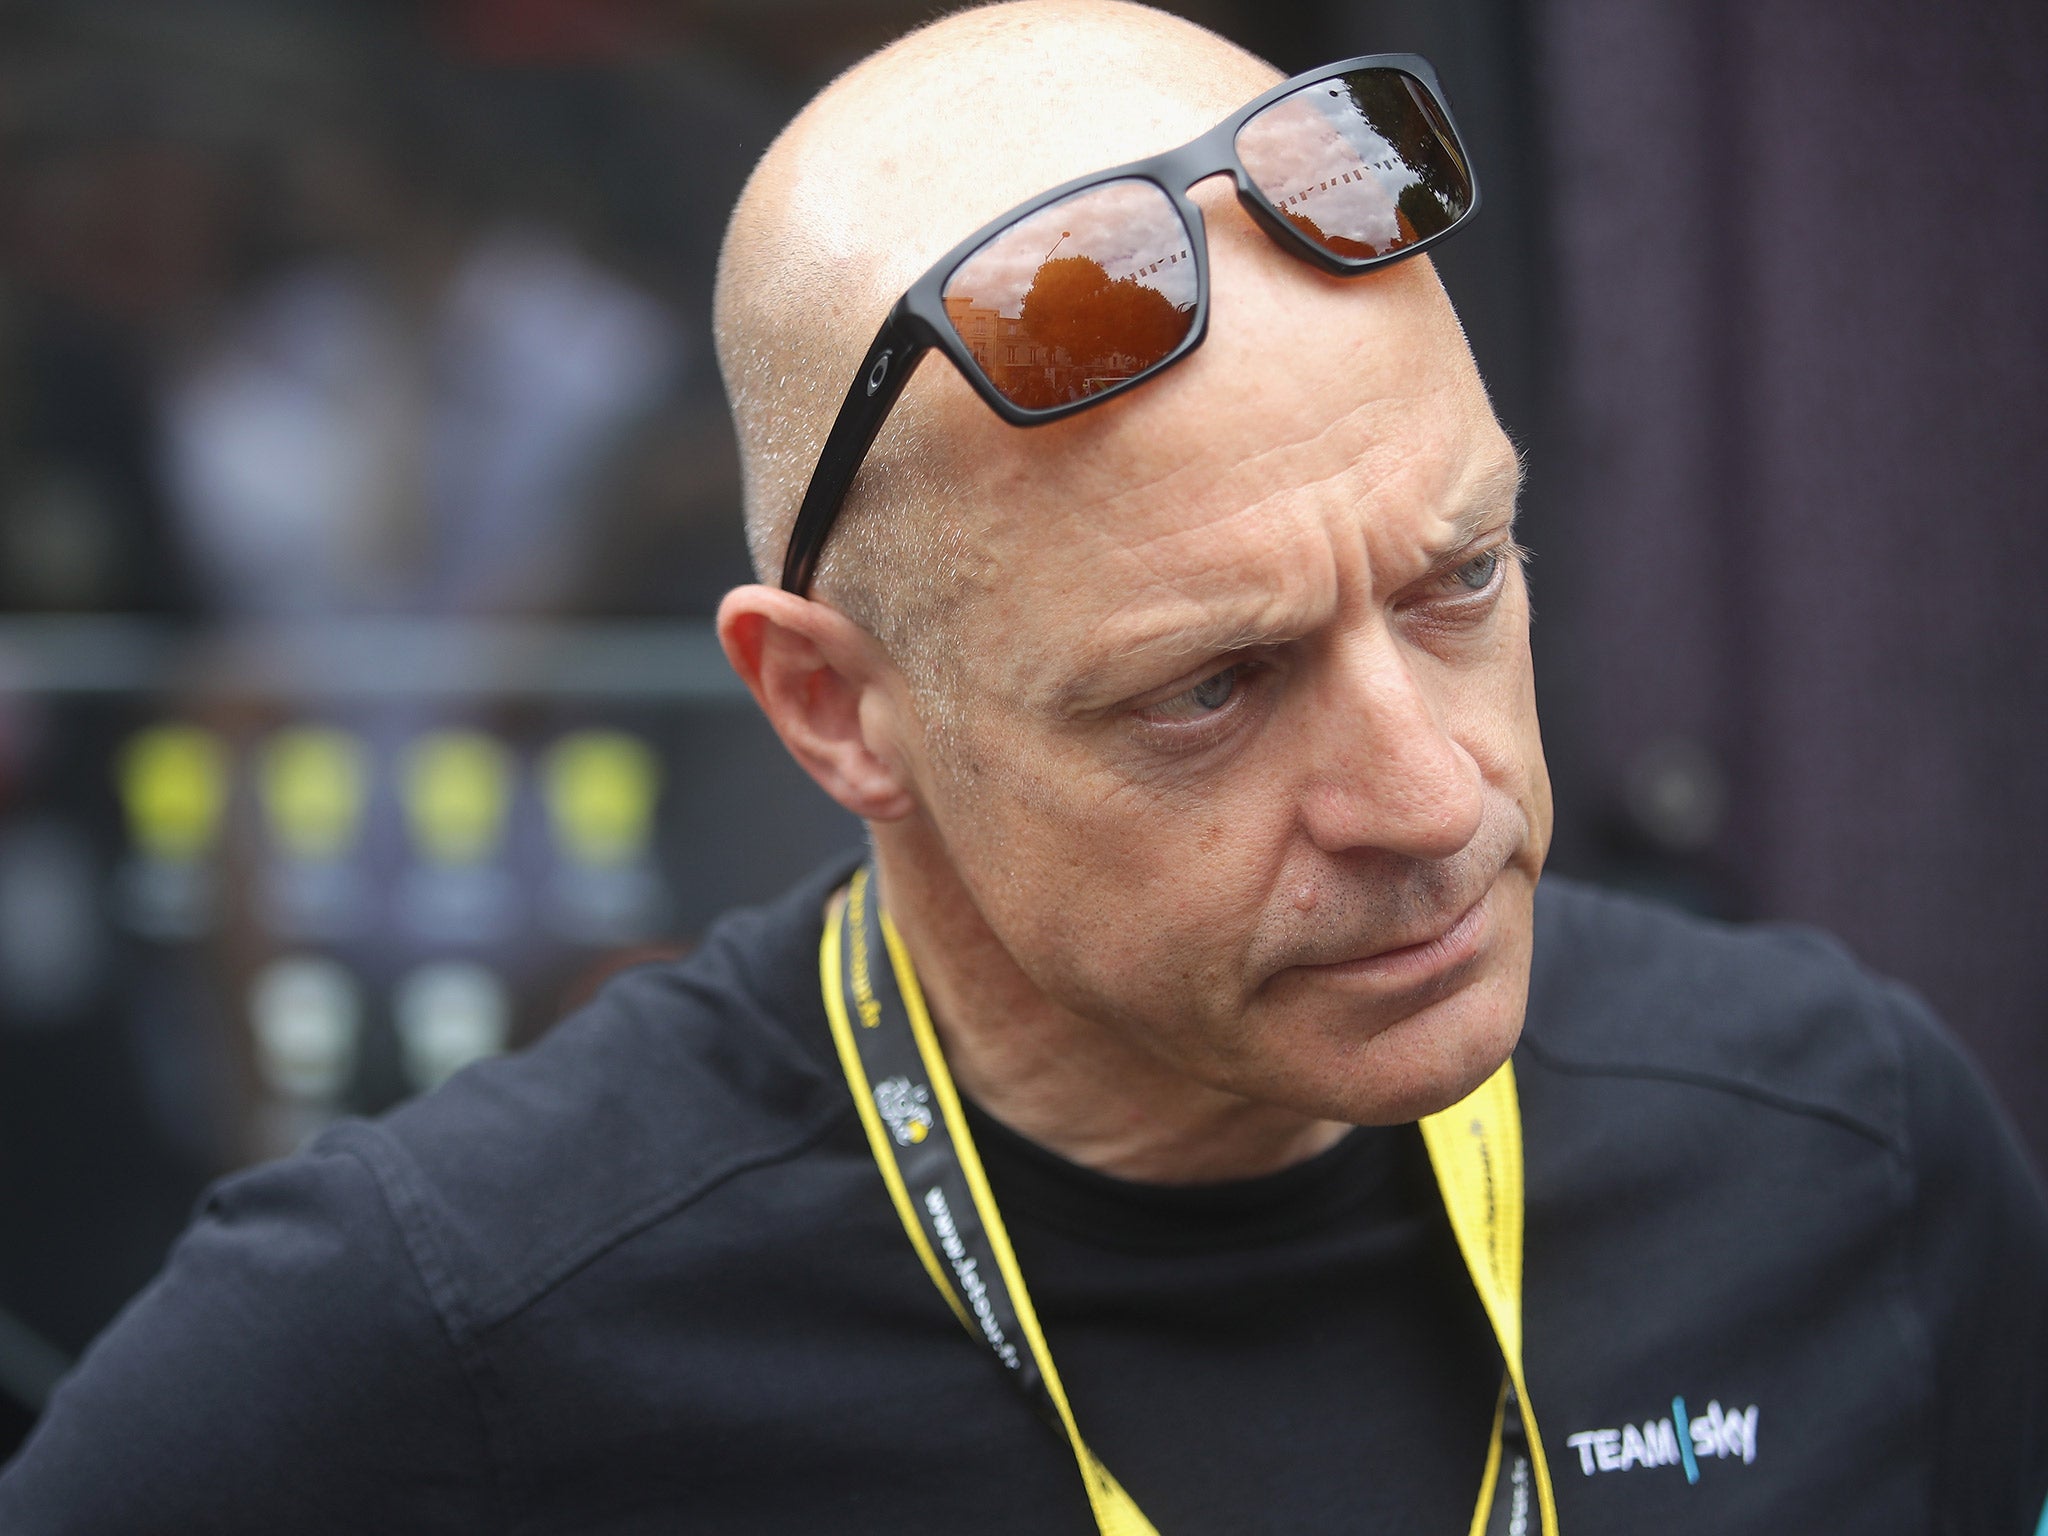 Dave Brailsford has once again refused to step down